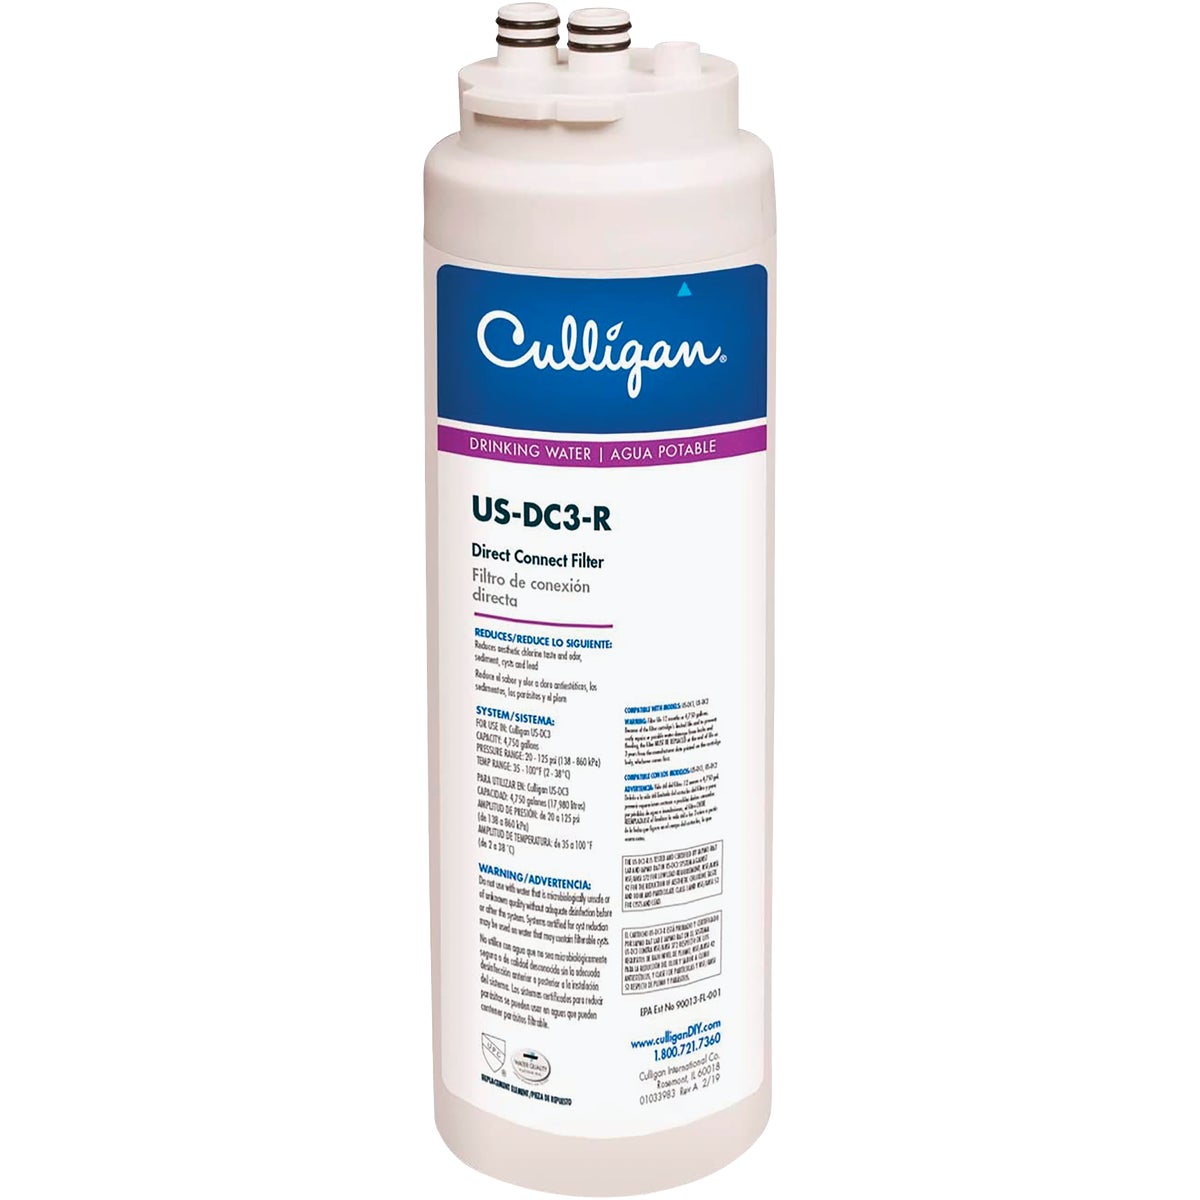 Culligan Direct Connect Under Sink Drinking Water Filter Cartridge for US-DC-3 Systems